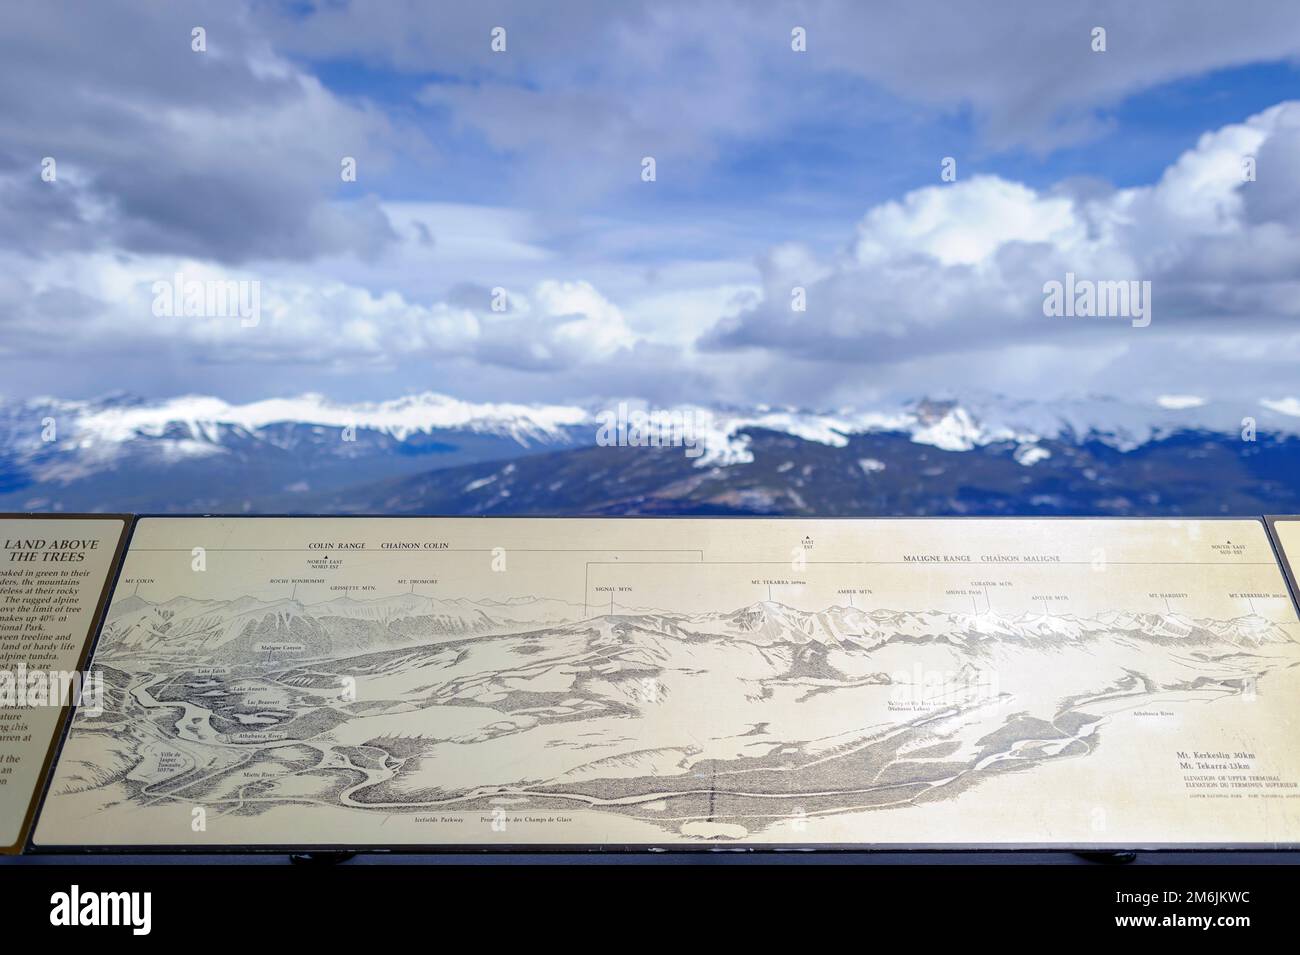 A tourist information panel describing the different mountain ranges from the top of The Whistlers Mountain, Jasper Tramway. Alberta Canada Stock Photo